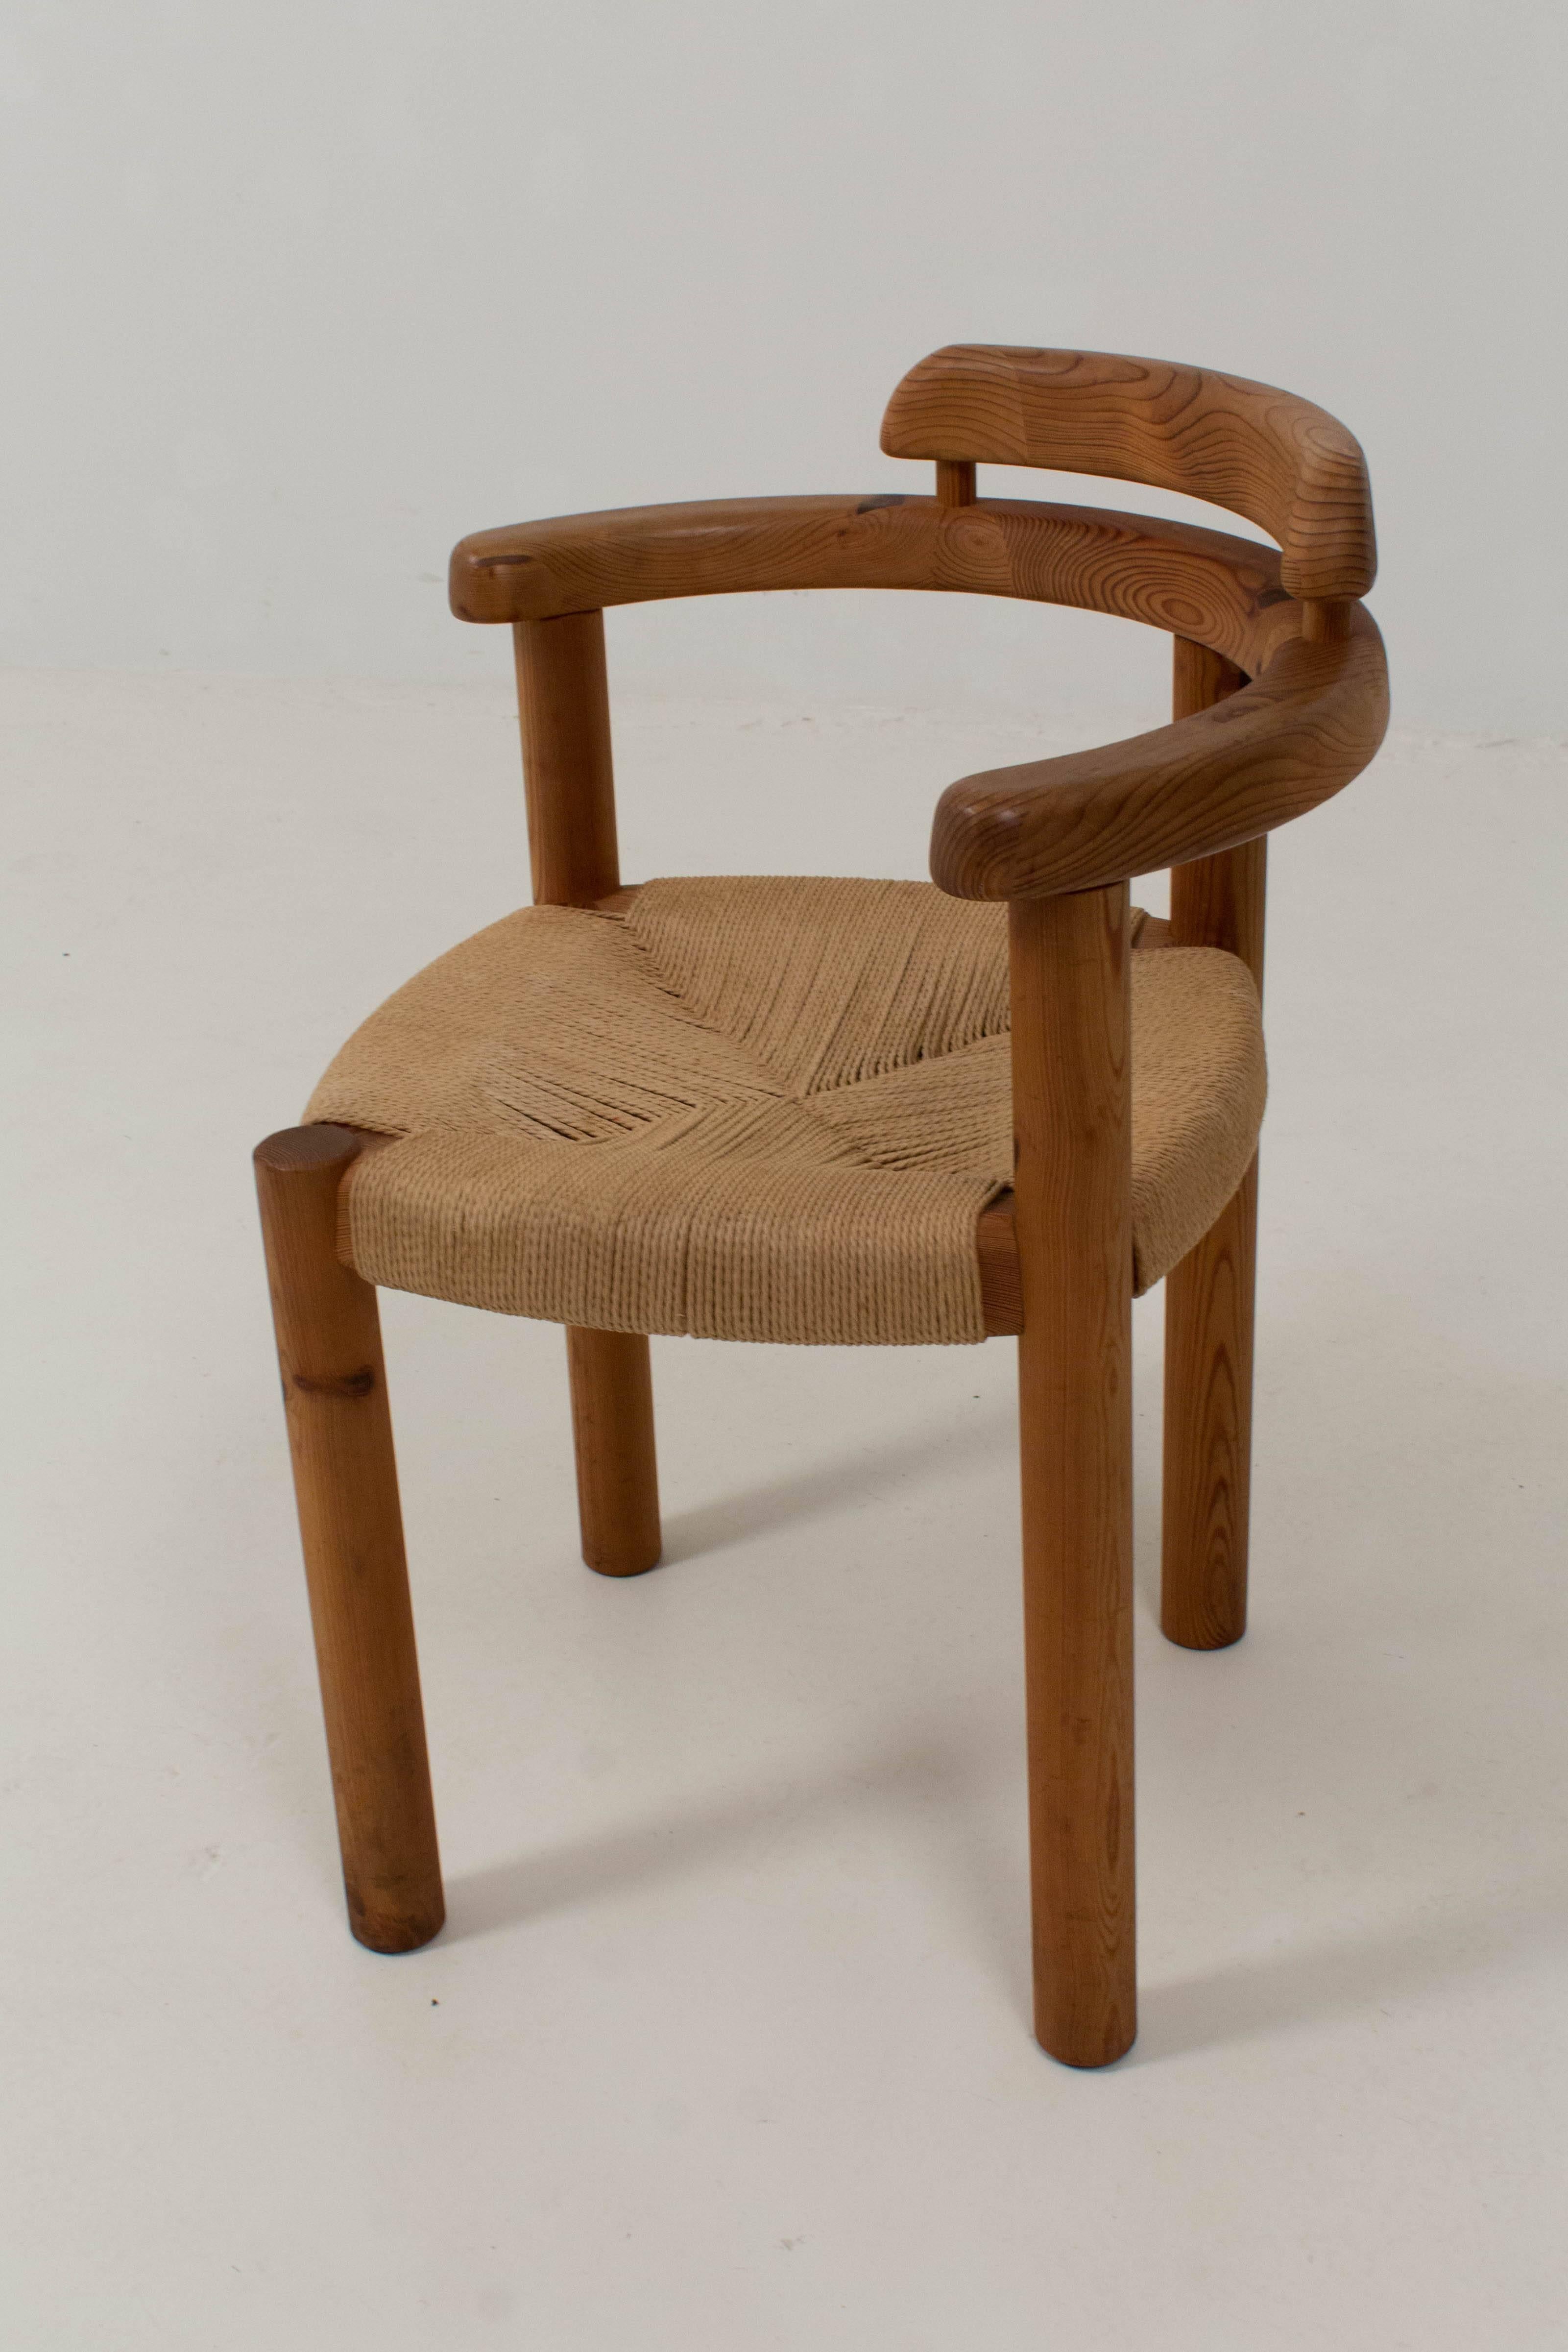 Stylish Mid-Century Modern corner chair in the style of Rainer Daumiller, 1970s.
Solid pine with rush matting seat.
In good original condition with minor wear consistent with age and use,
preserving a beautiful patina.